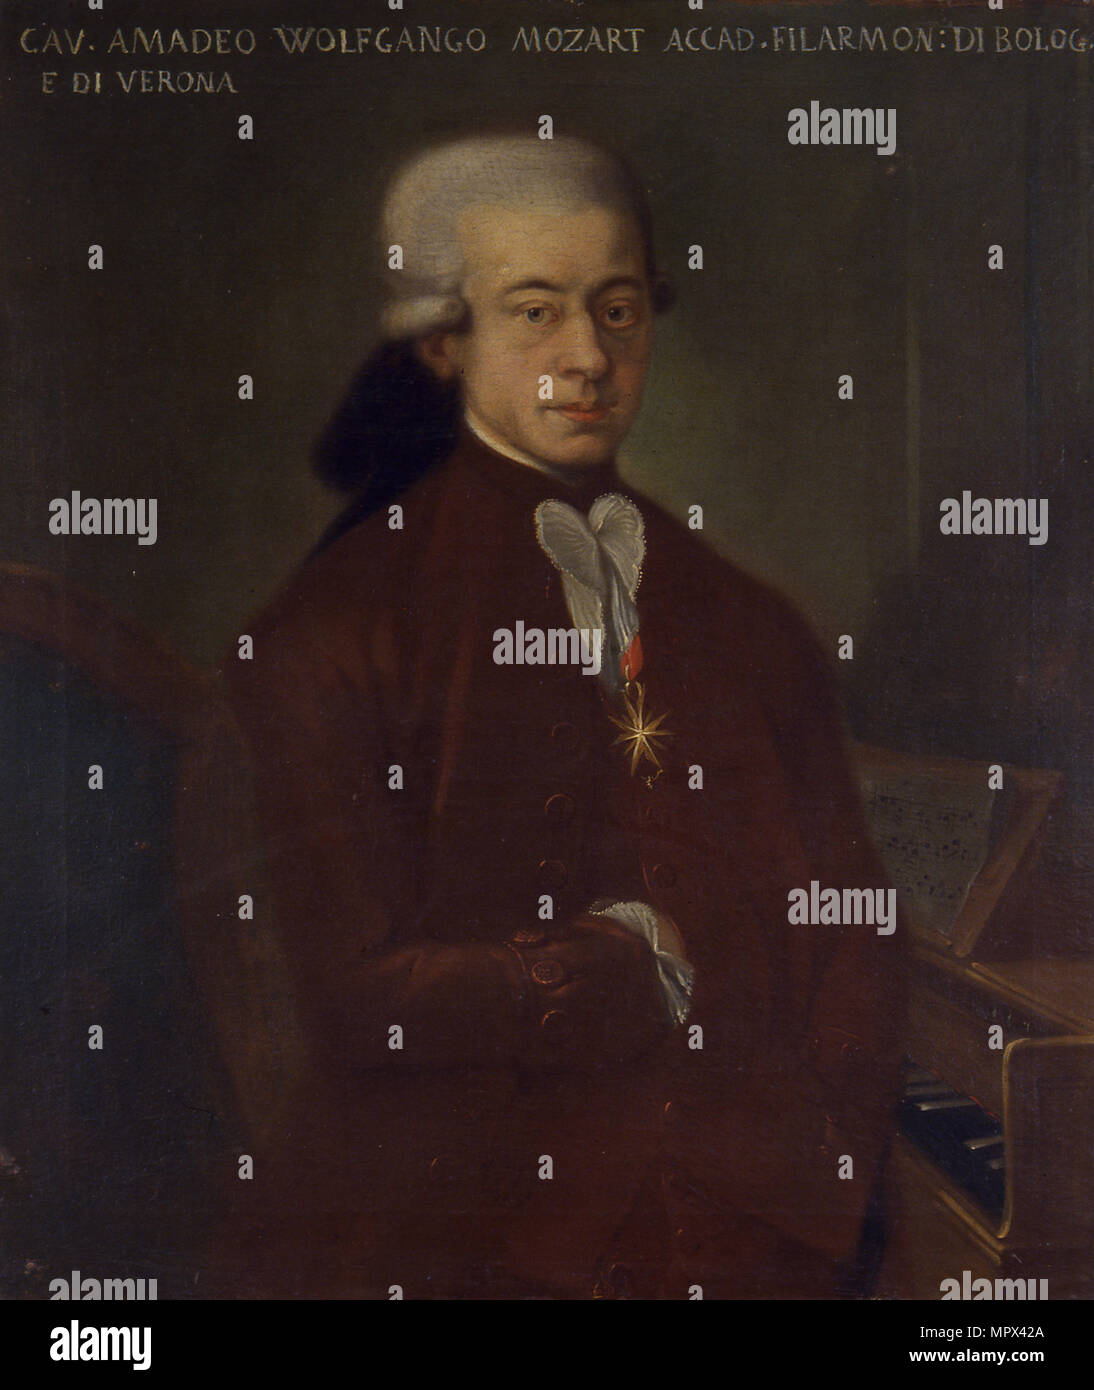 Portrait of the composer Wolfgang Amadeus Mozart (1756-1791), 1777. Stock Photo